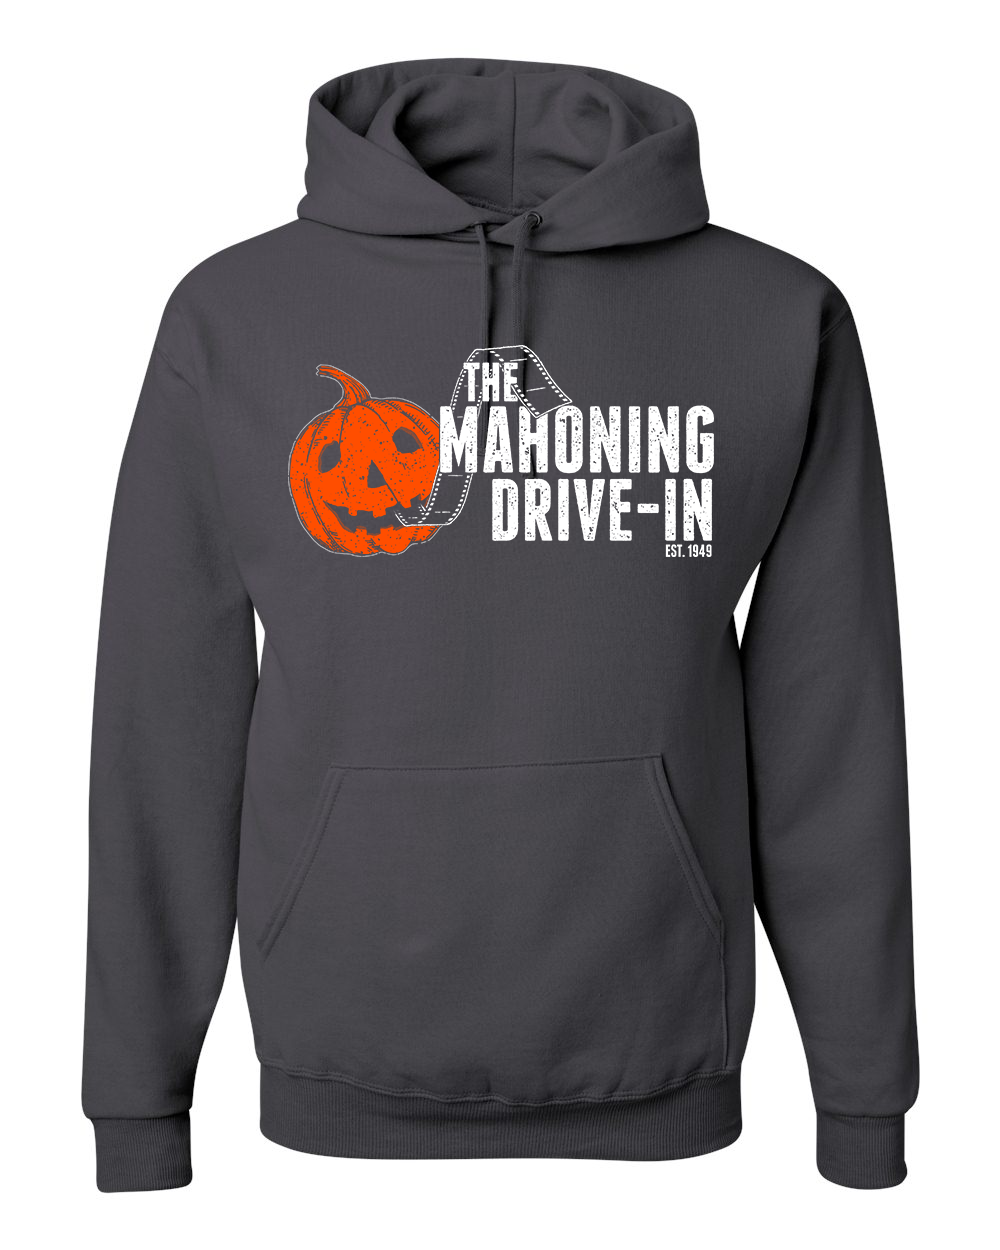 Mahoning Drive-In - Spooky Logo Pullover Hoodie